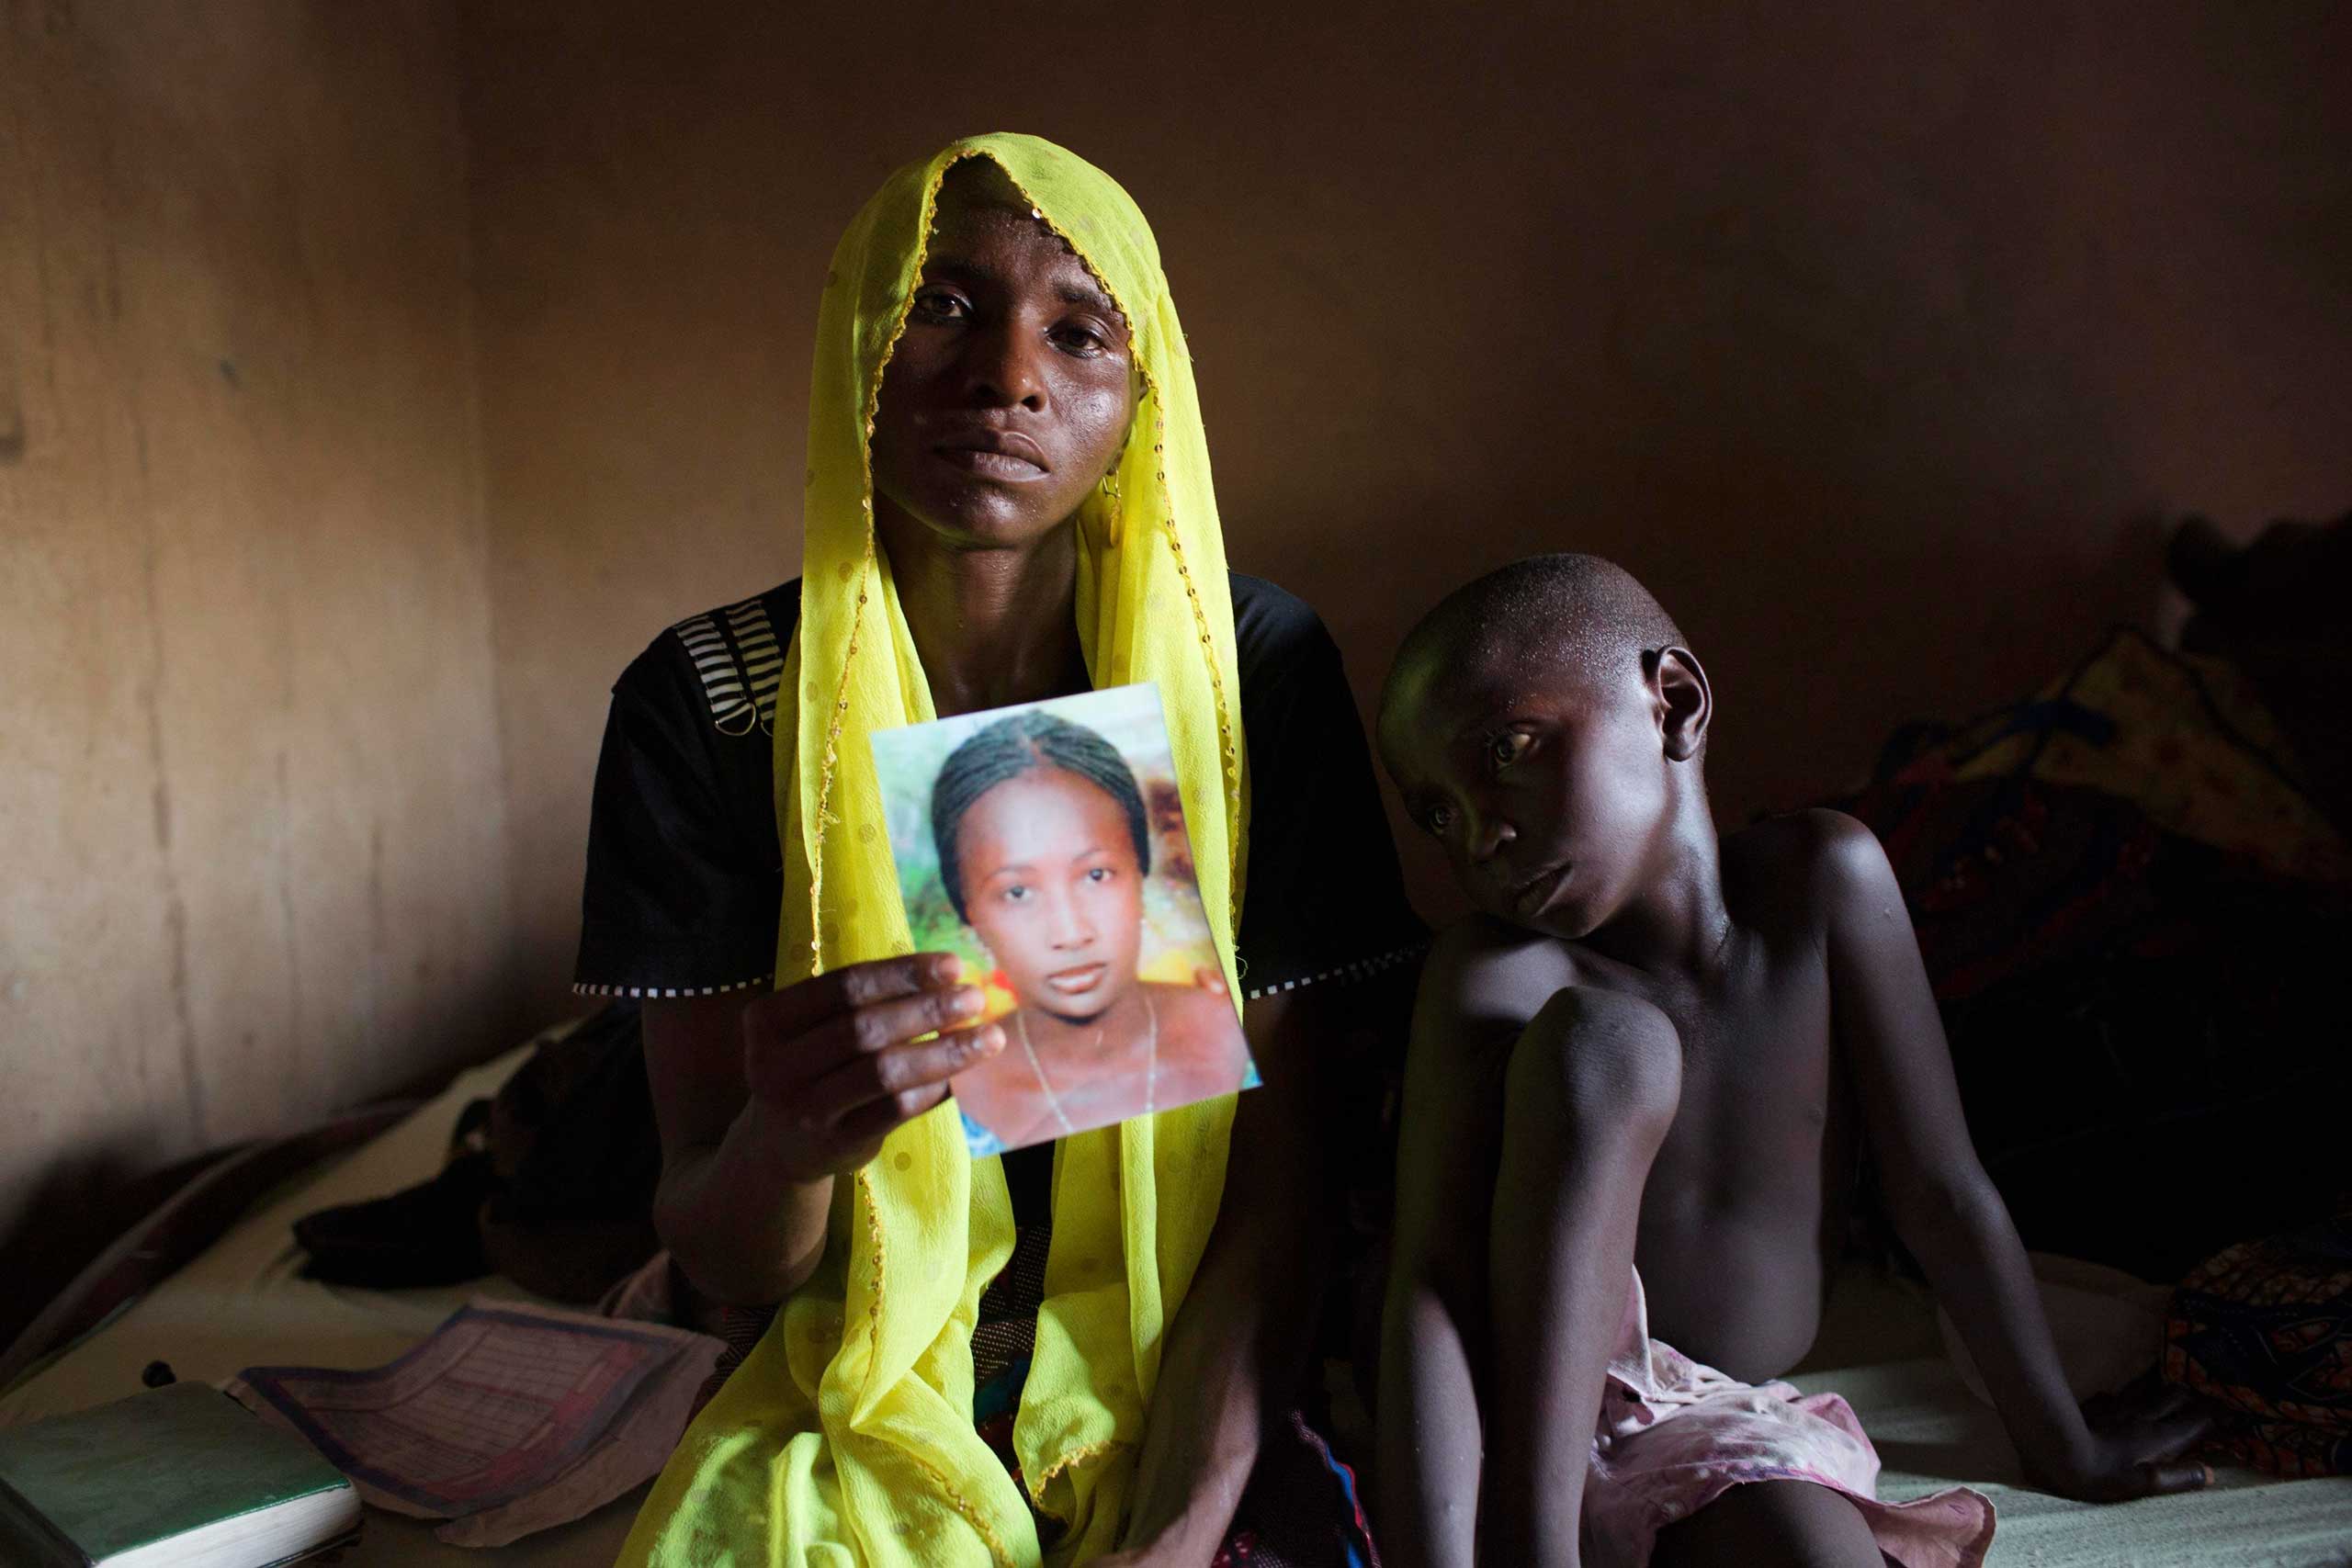 Rachel Daniel, 35, holds up a picture of her abducted daughter Rose Daniel, 17, as her son Bukar, 7, sits beside her at her home in Maiduguri, May 21, 2014. Boko Haram kidnapped an additional 30 boys and girls from a village in northeast Nigeria during the weekend. (Joe Penney—Reuters)